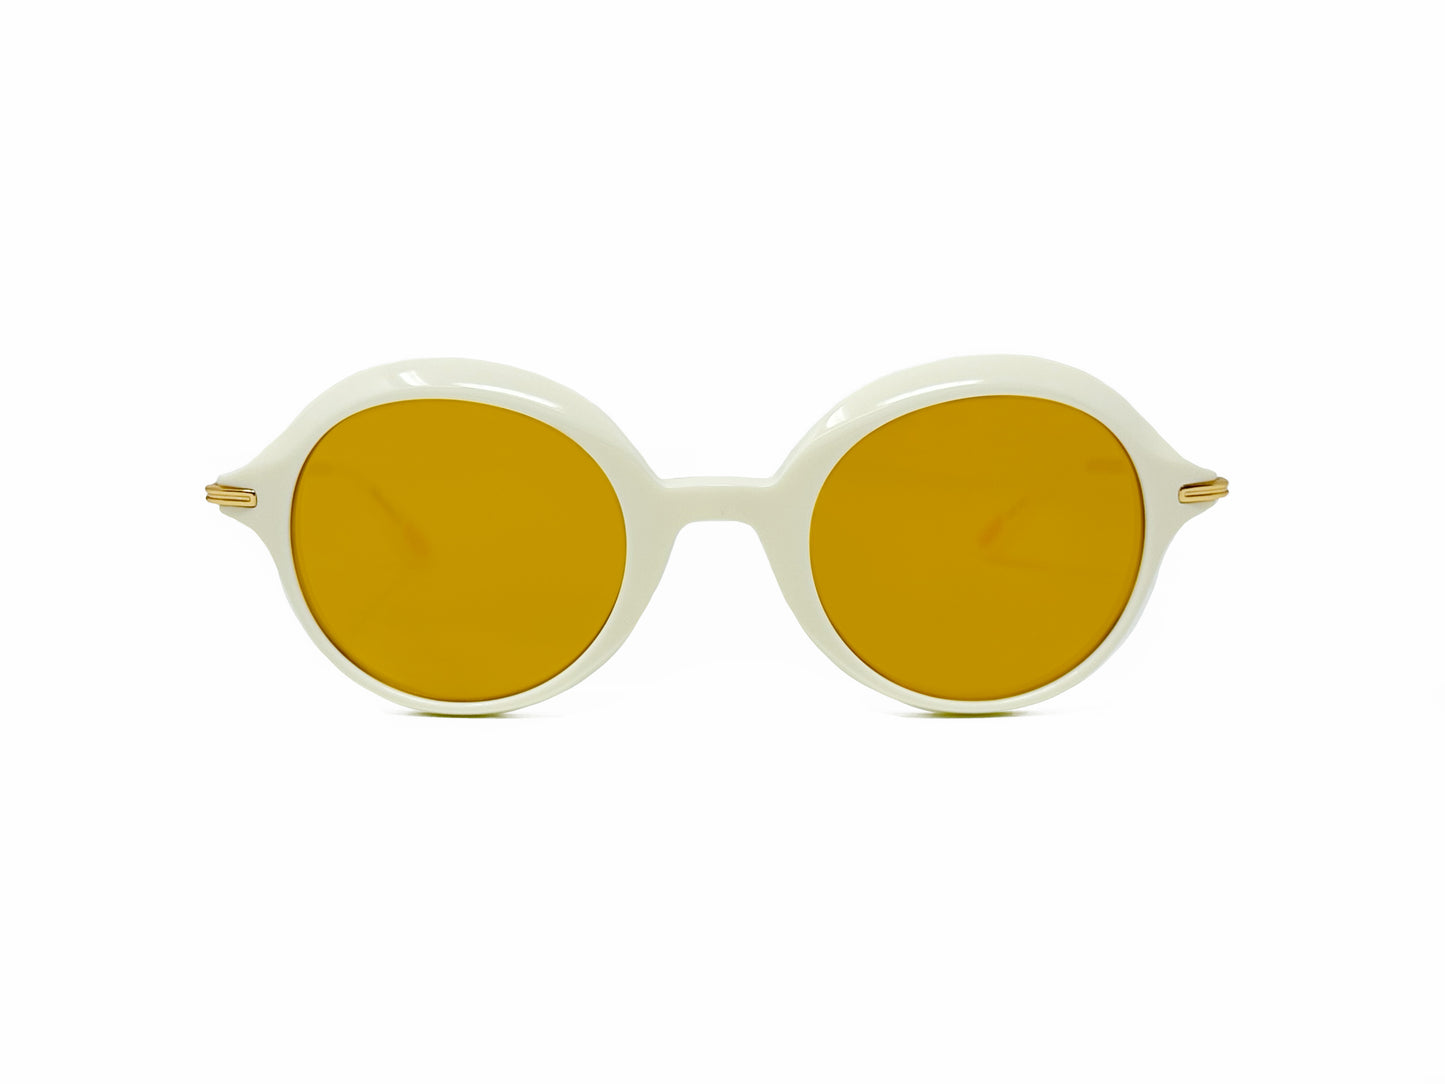 Christian Roth round acetate sunglass. Model: Having a Ball. Color: IVR - Ivory with yellow lenses. Front view. 